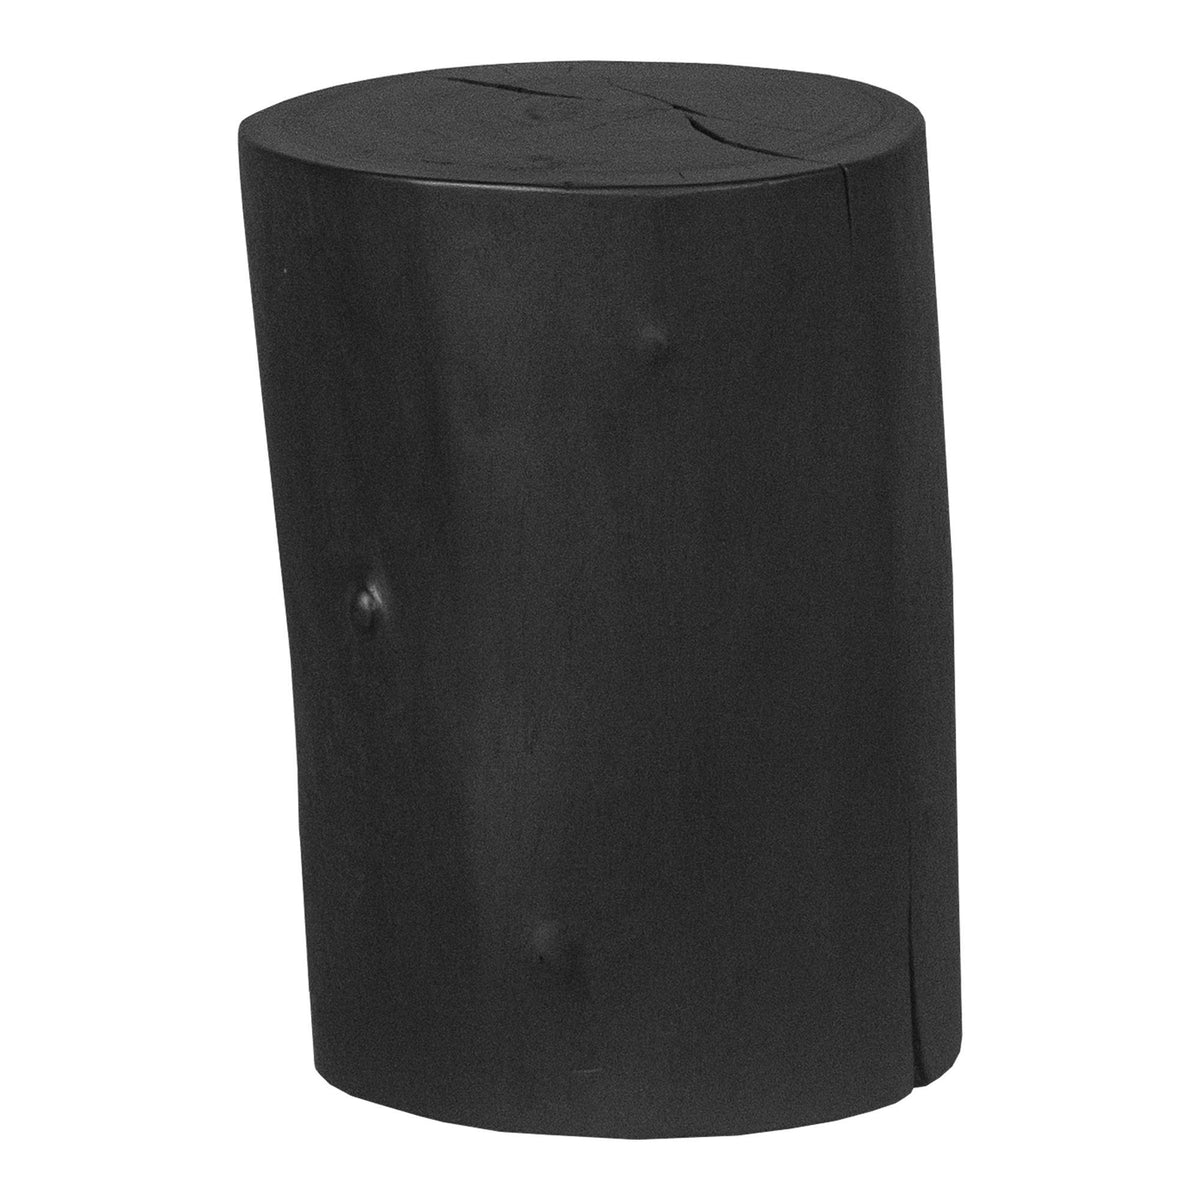 Moe's Home Collection Dendra Accent Table Black - EI-1071-02